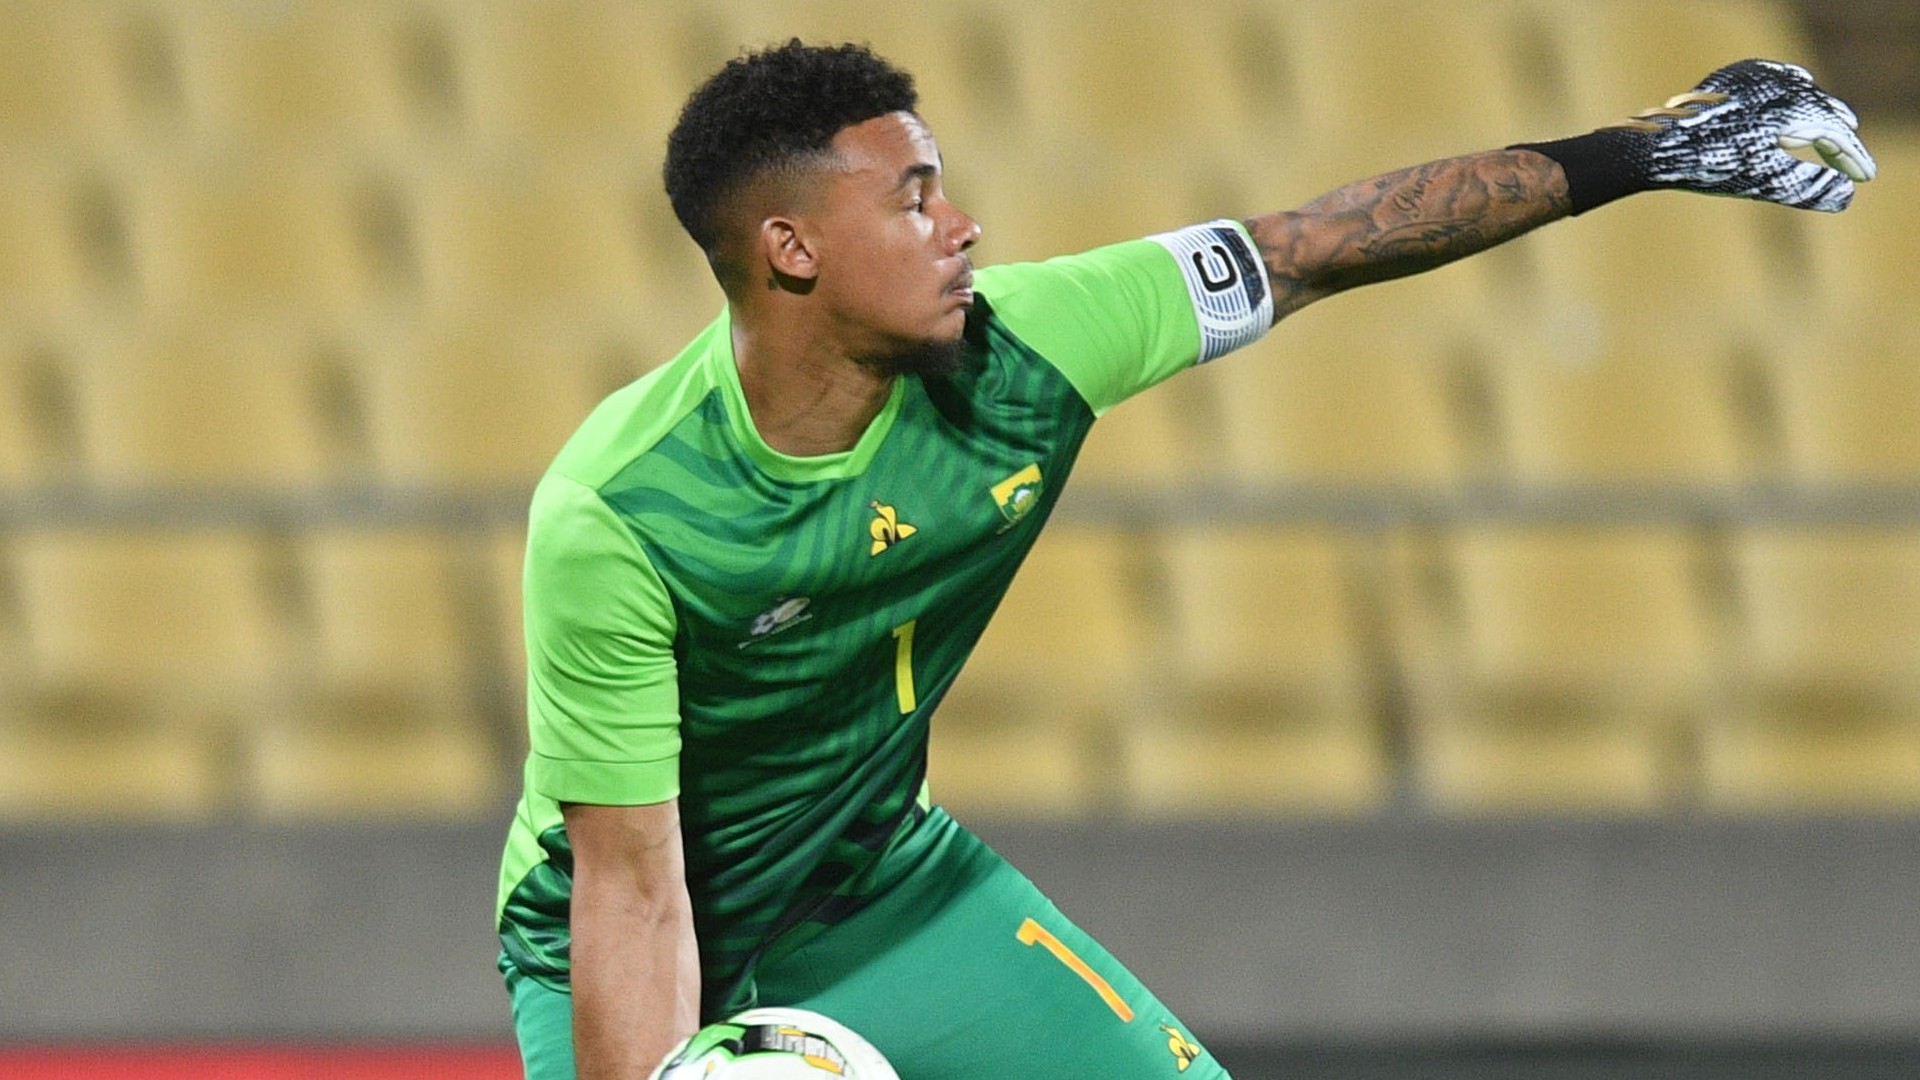 Top Five: PSL transfer rumours to watch - Williams to Orlando Pirates? Kaizer Chiefs linked with Gamildien